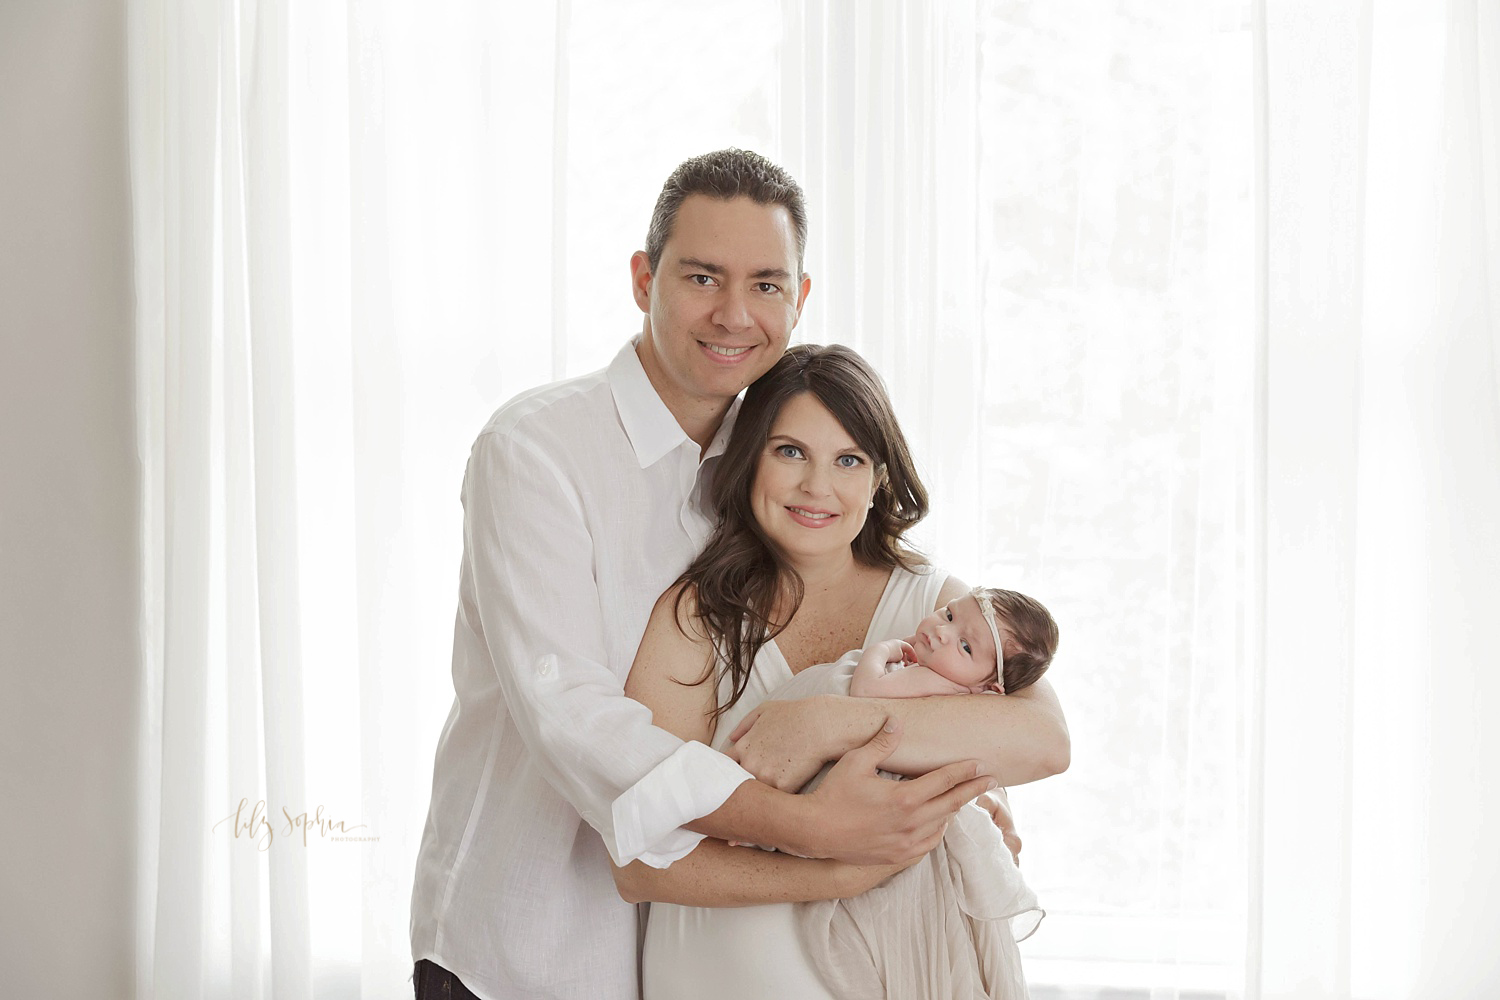  Image of a new family of three, the mother is holding her newborn daughter who is looking at the camera, and the parents are both smiling at the camera. Taken in the natural light studio of Lily Sophia Photography.&nbsp; 